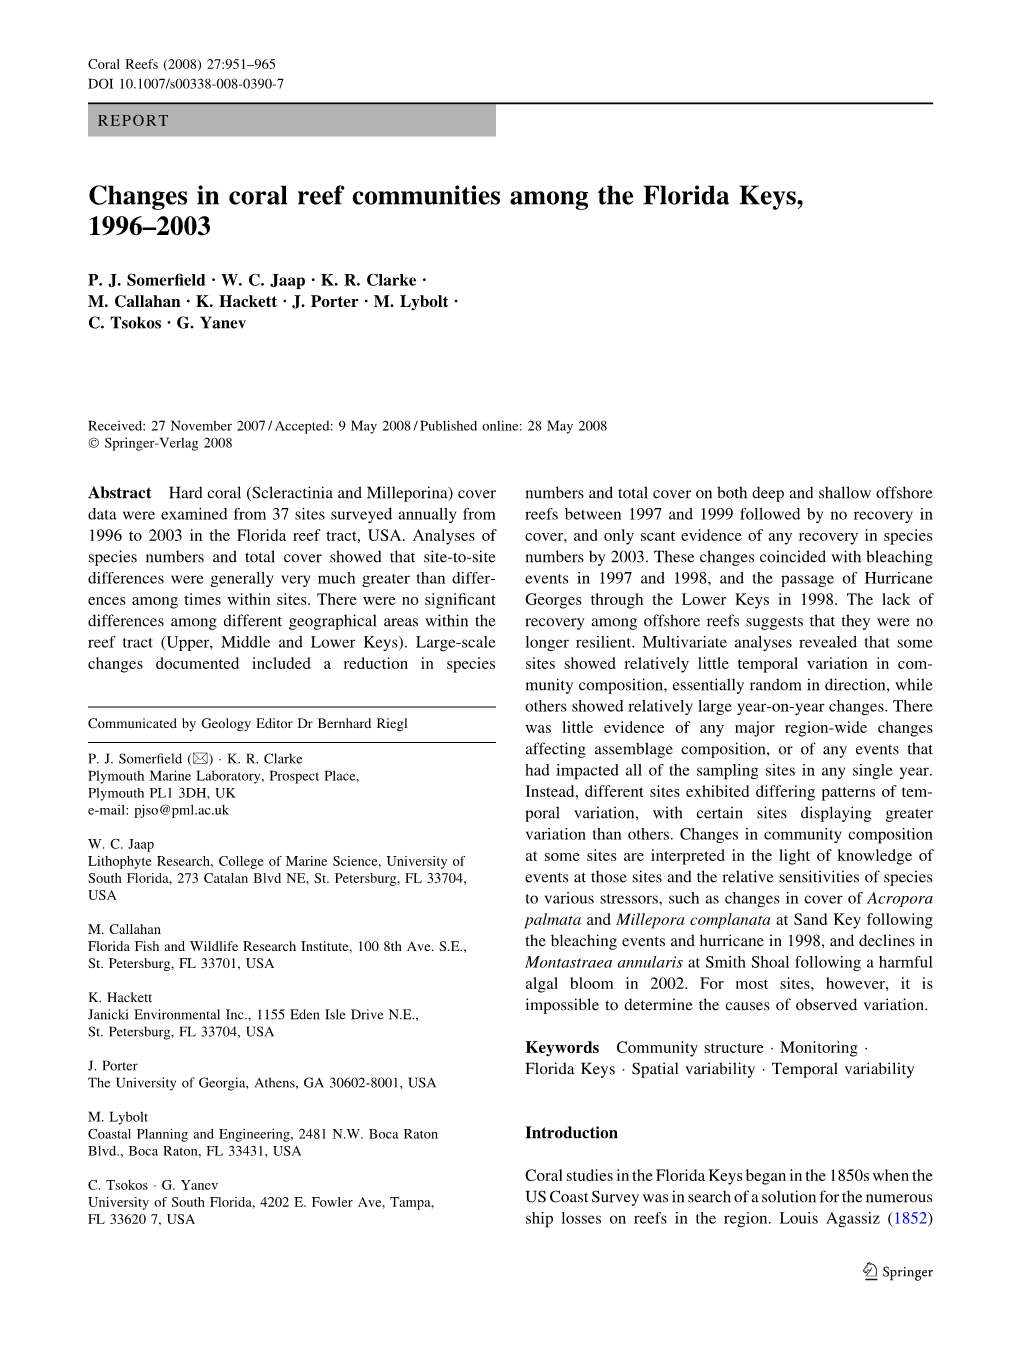 Changes in Coral Reef Communities Among the Florida Keys, 1996–2003